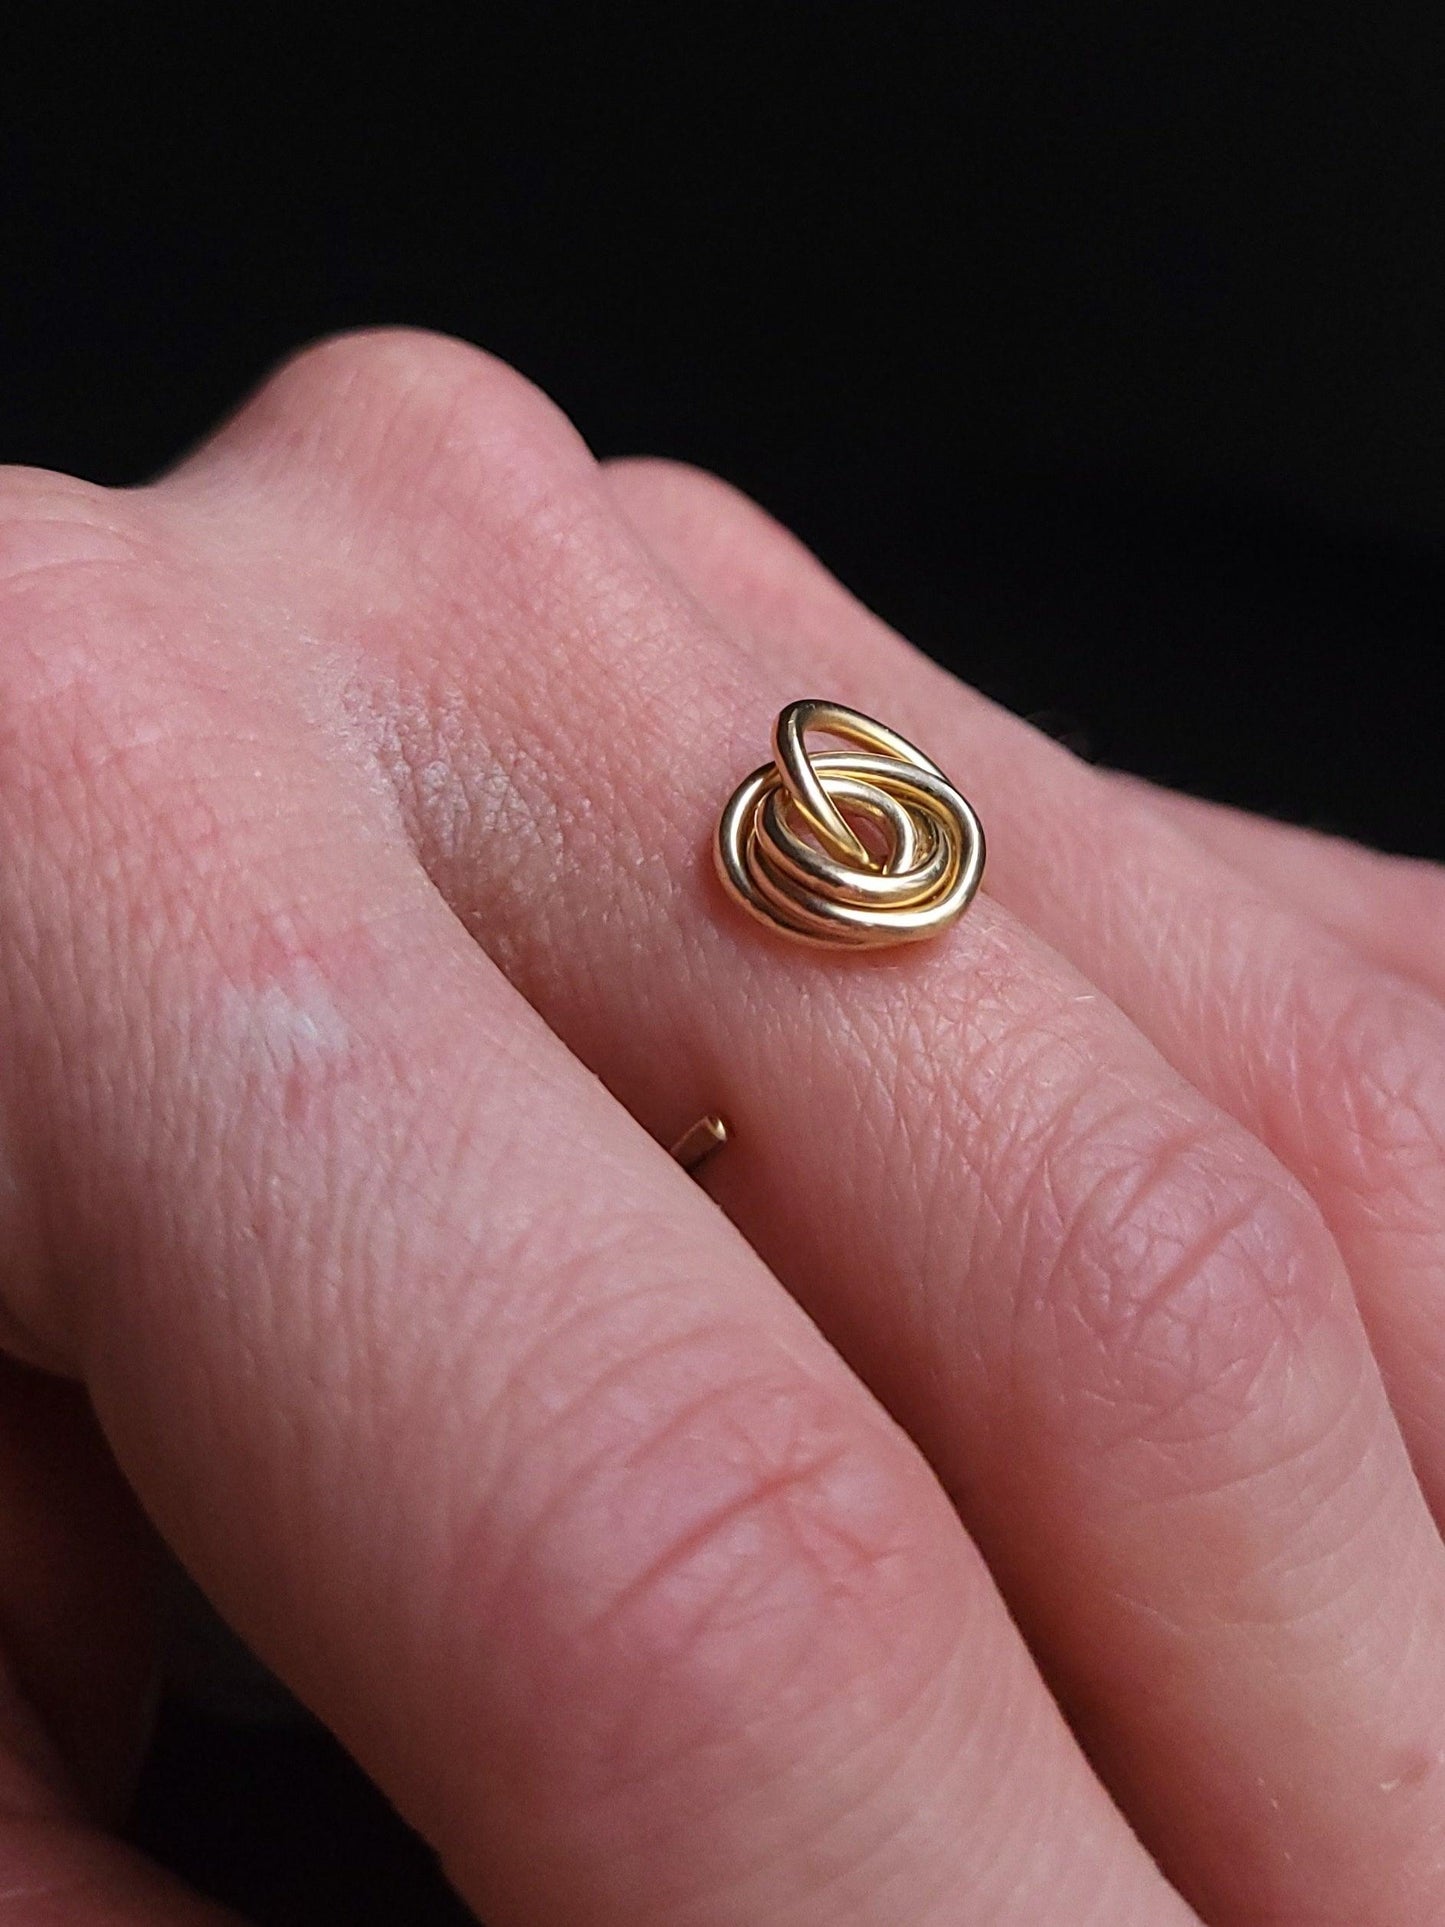 Winding Knot Ring for practicing mindfulness and optimism